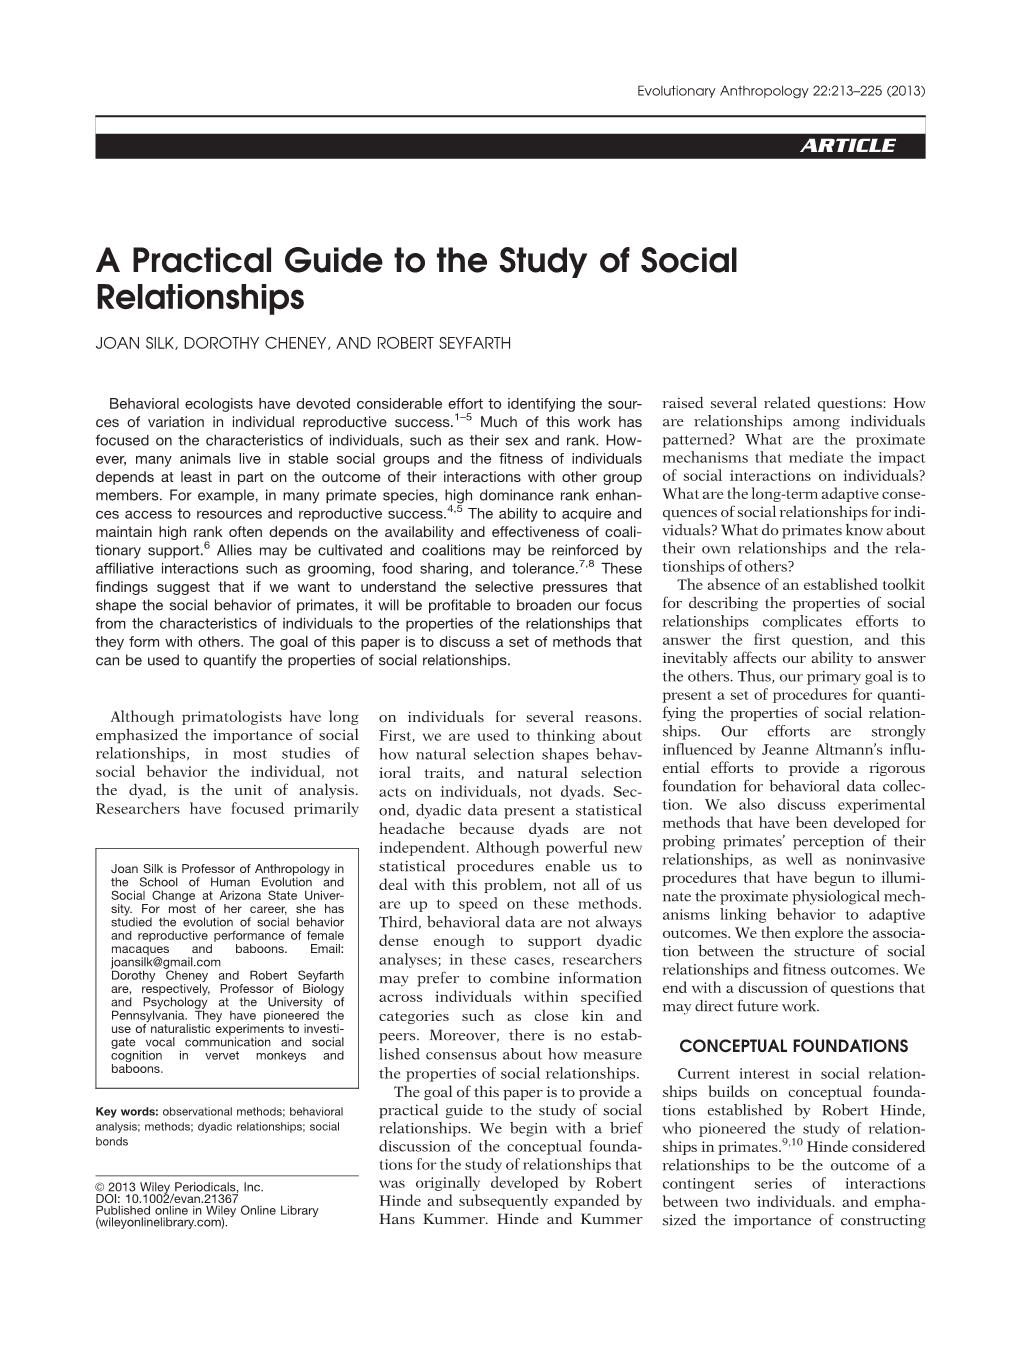 A Practical Guide to the Study of Social Relationships